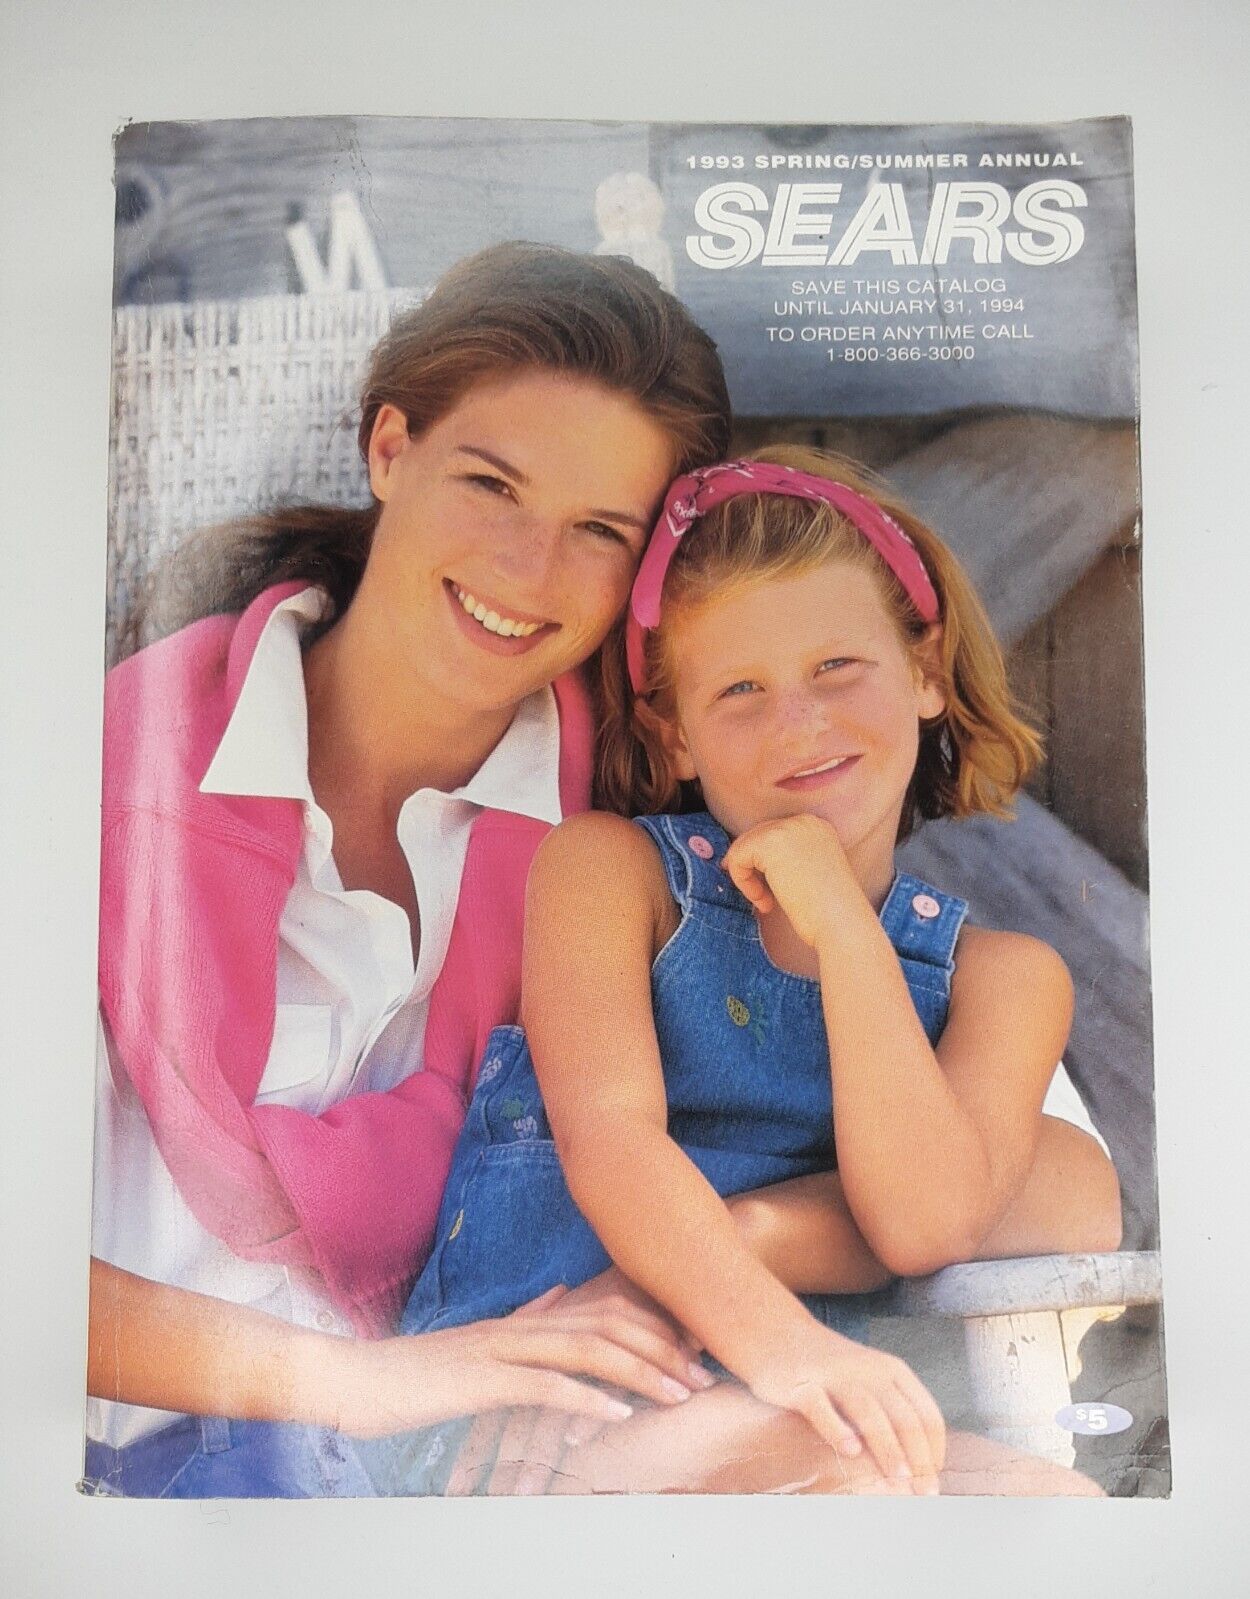 Sears Catalog 1993 Spring and Summer Annual